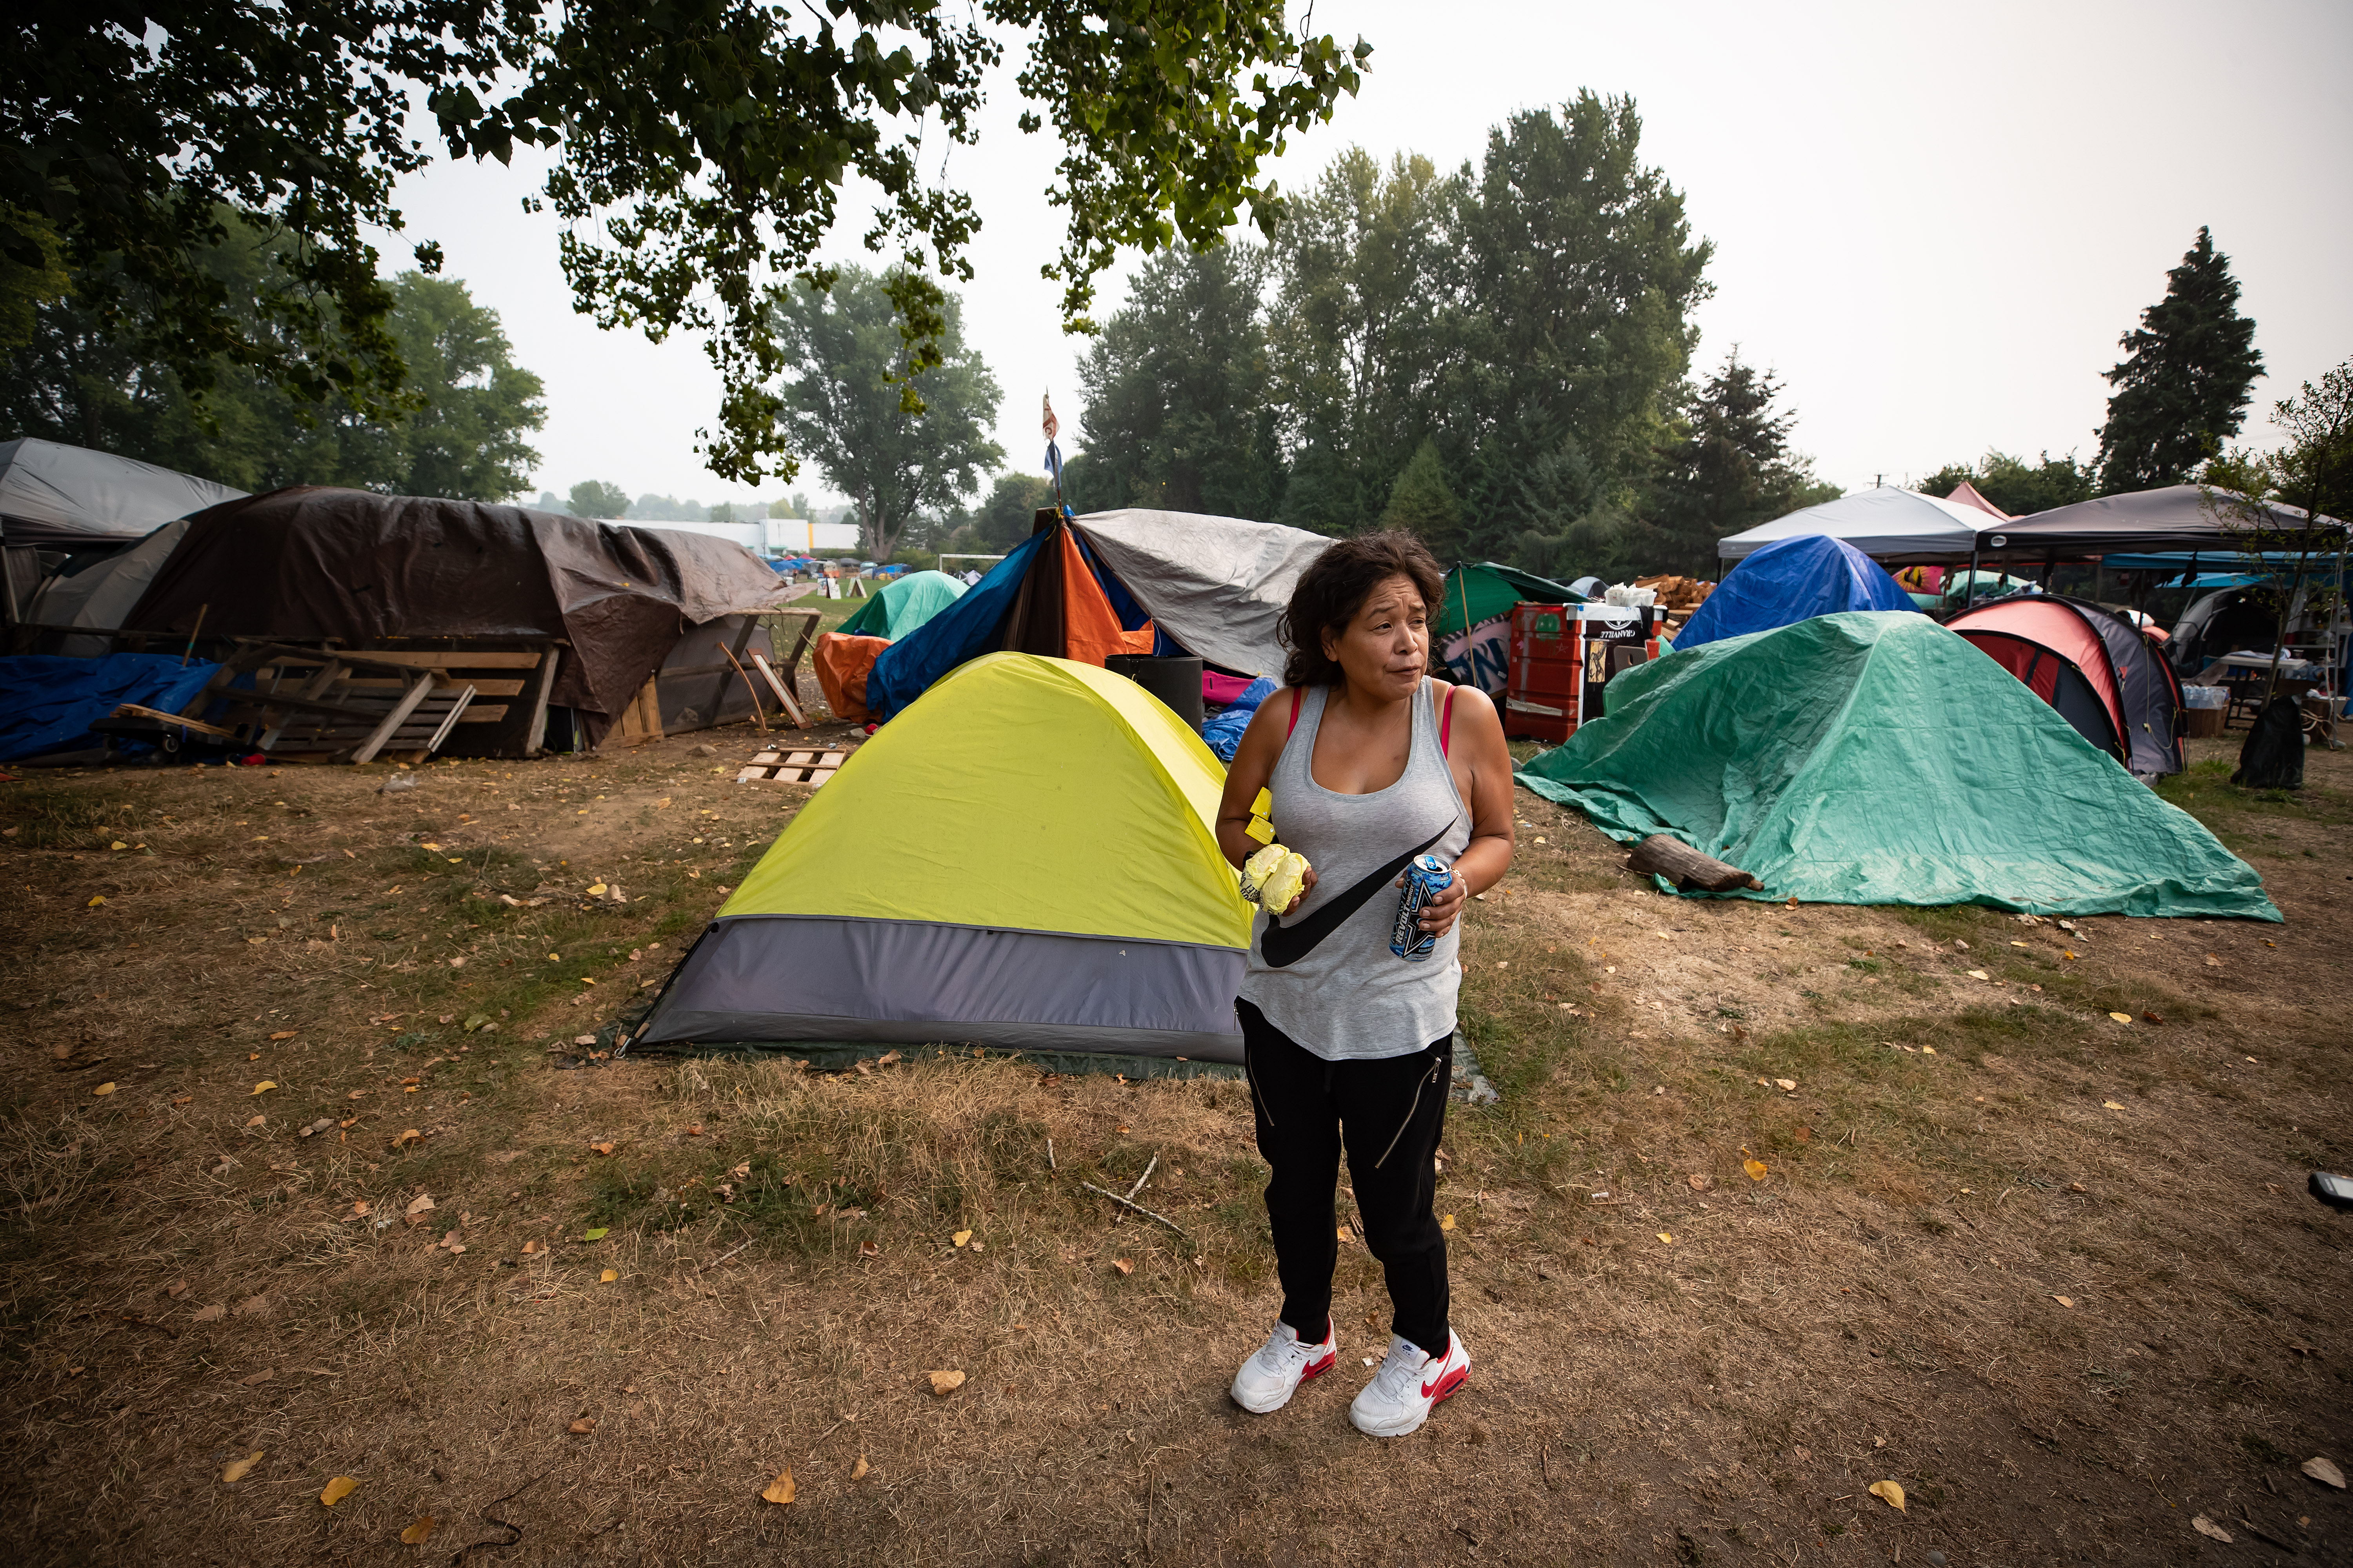 Violent Crime In Vancouver Tent City Neighbourhood On The Rise Police Say The Globe And Mail